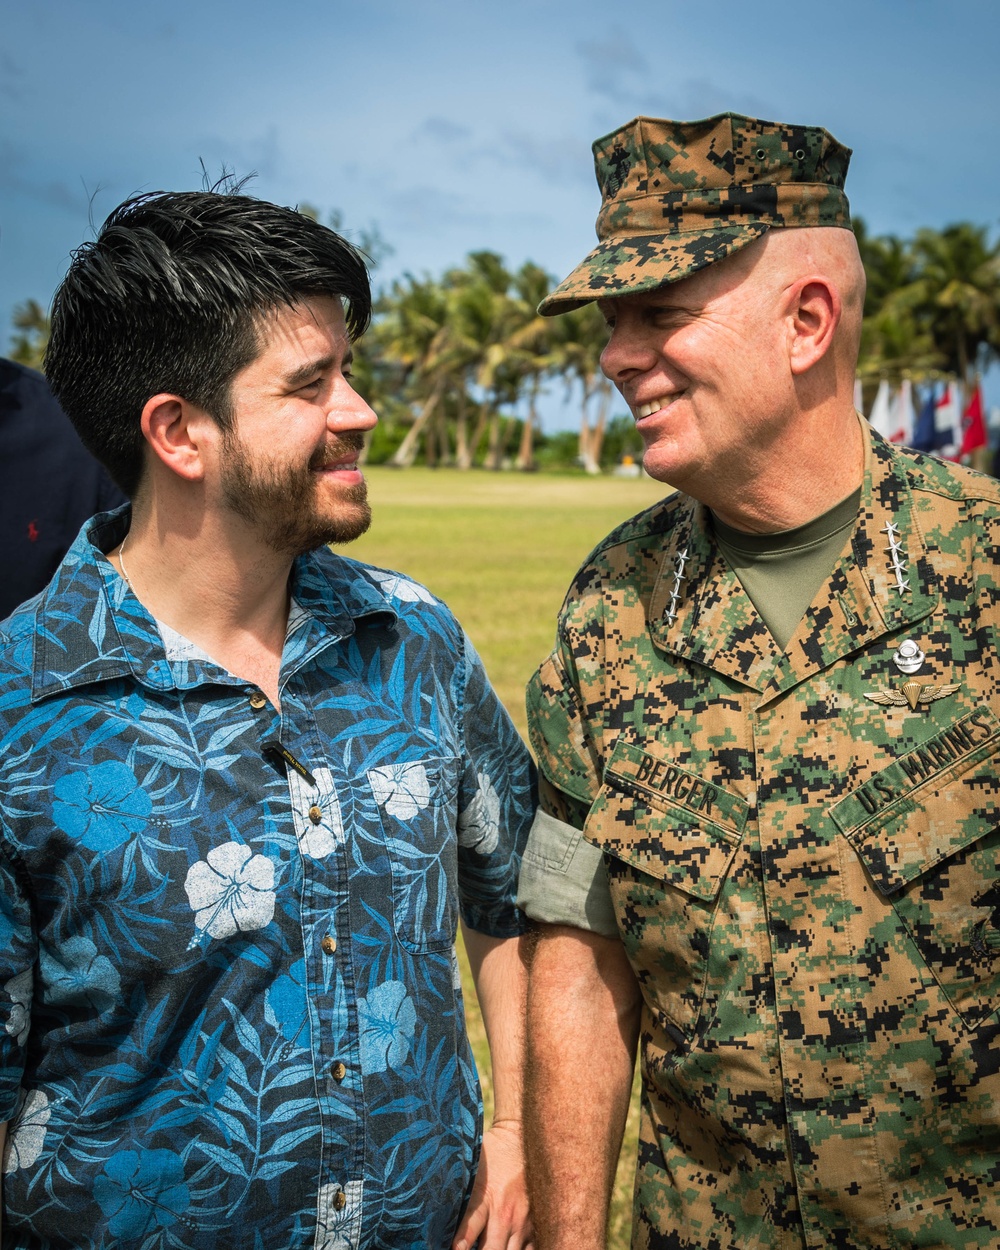 Marine Corps Base Camp Blaz becomes reactivated during a Reactivation and Naming Ceremony